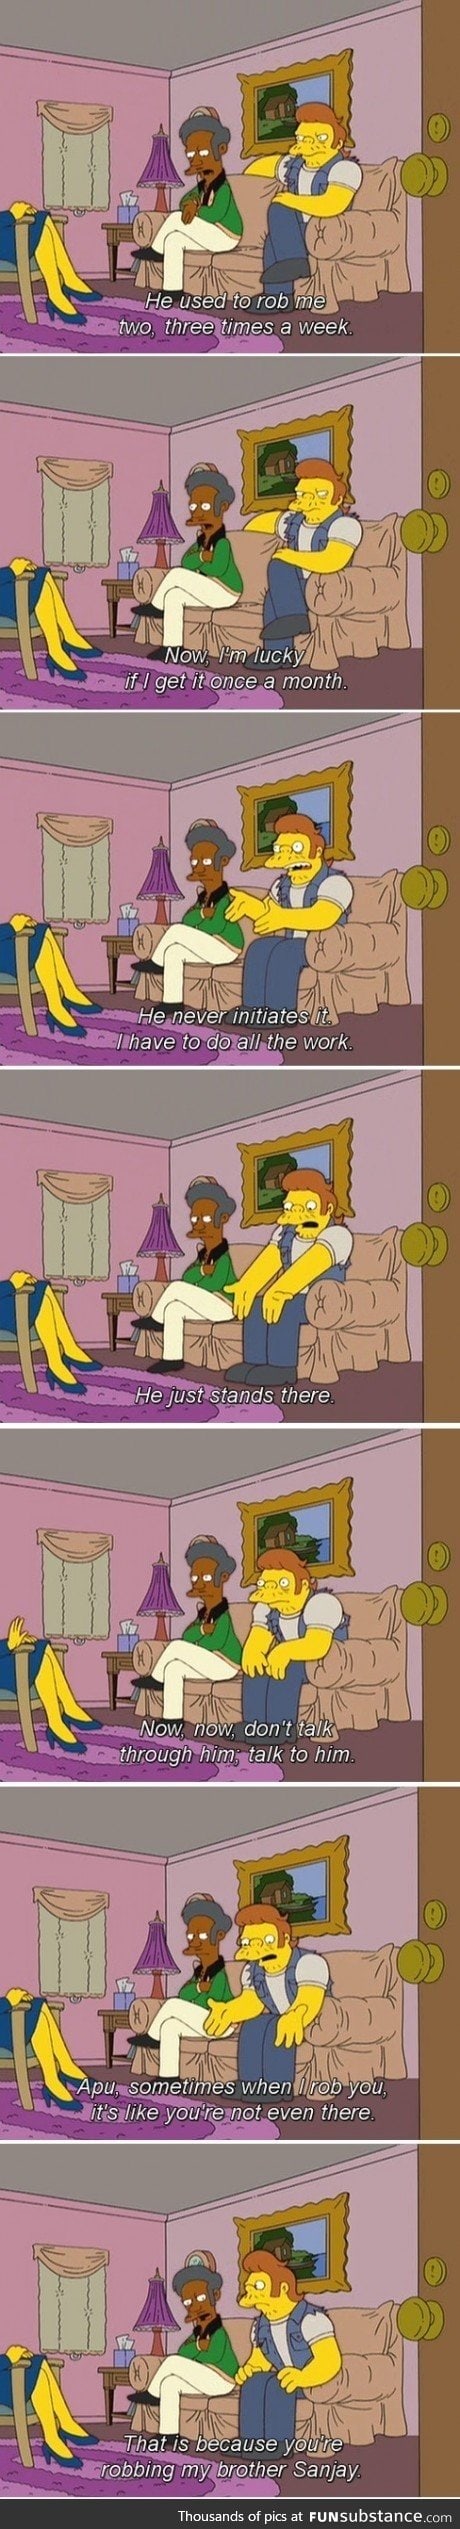 The Simpsons though